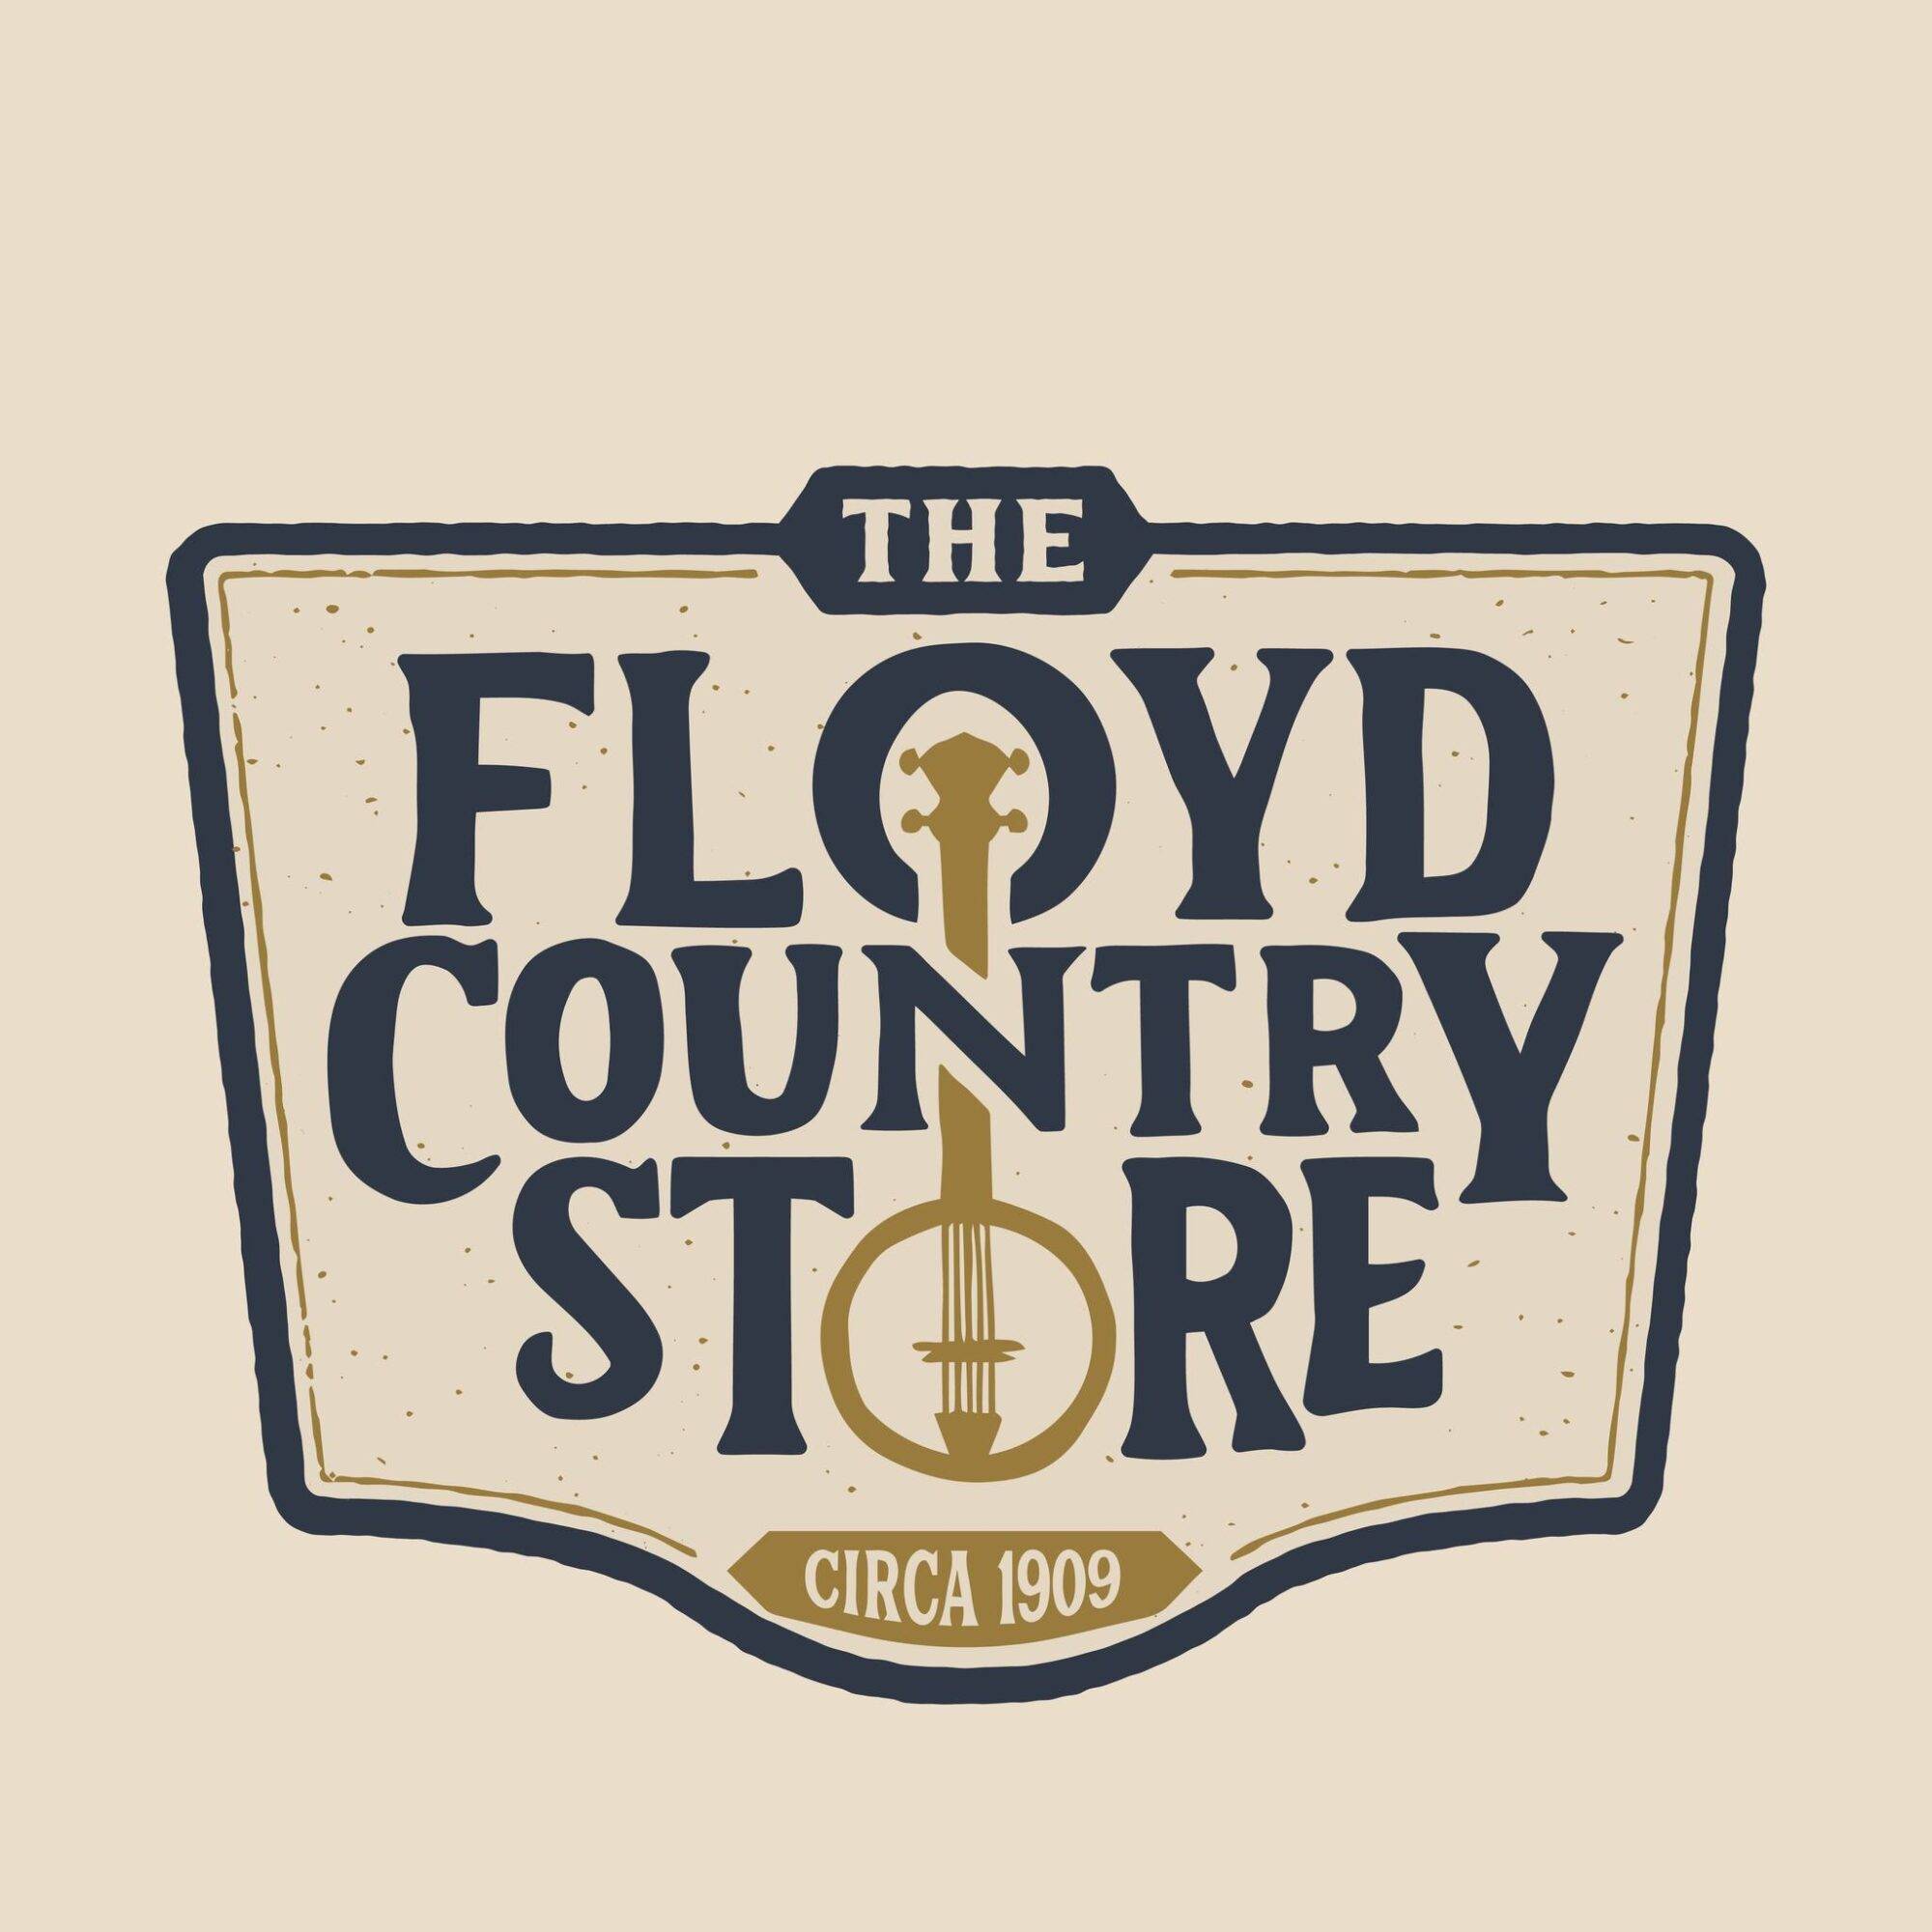 Floyd Country Store